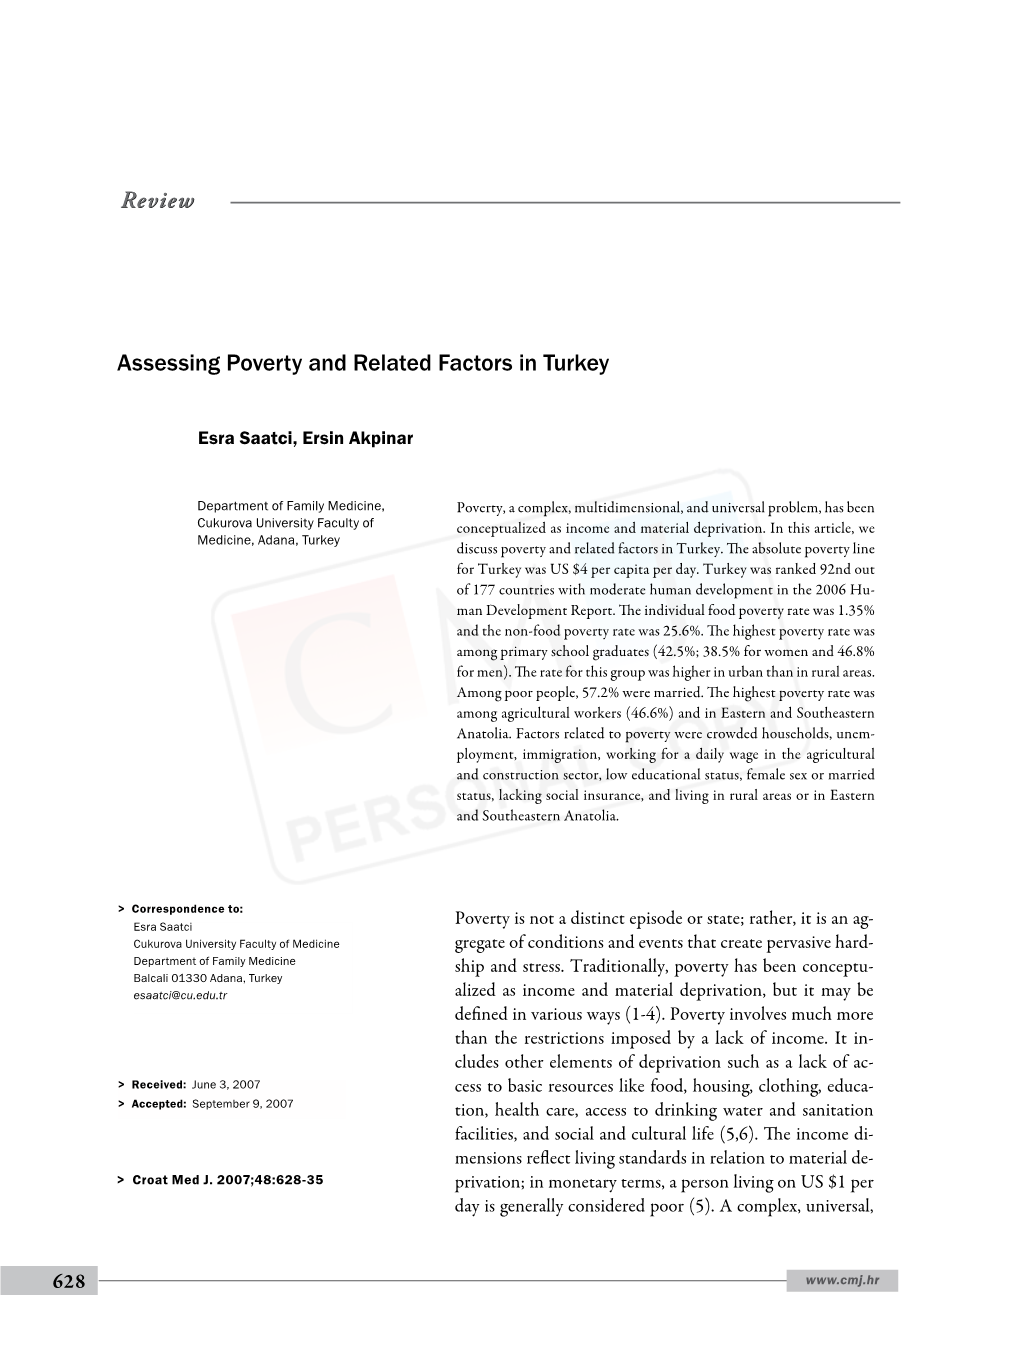 Assessing Poverty and Related Factors in Turkey Review